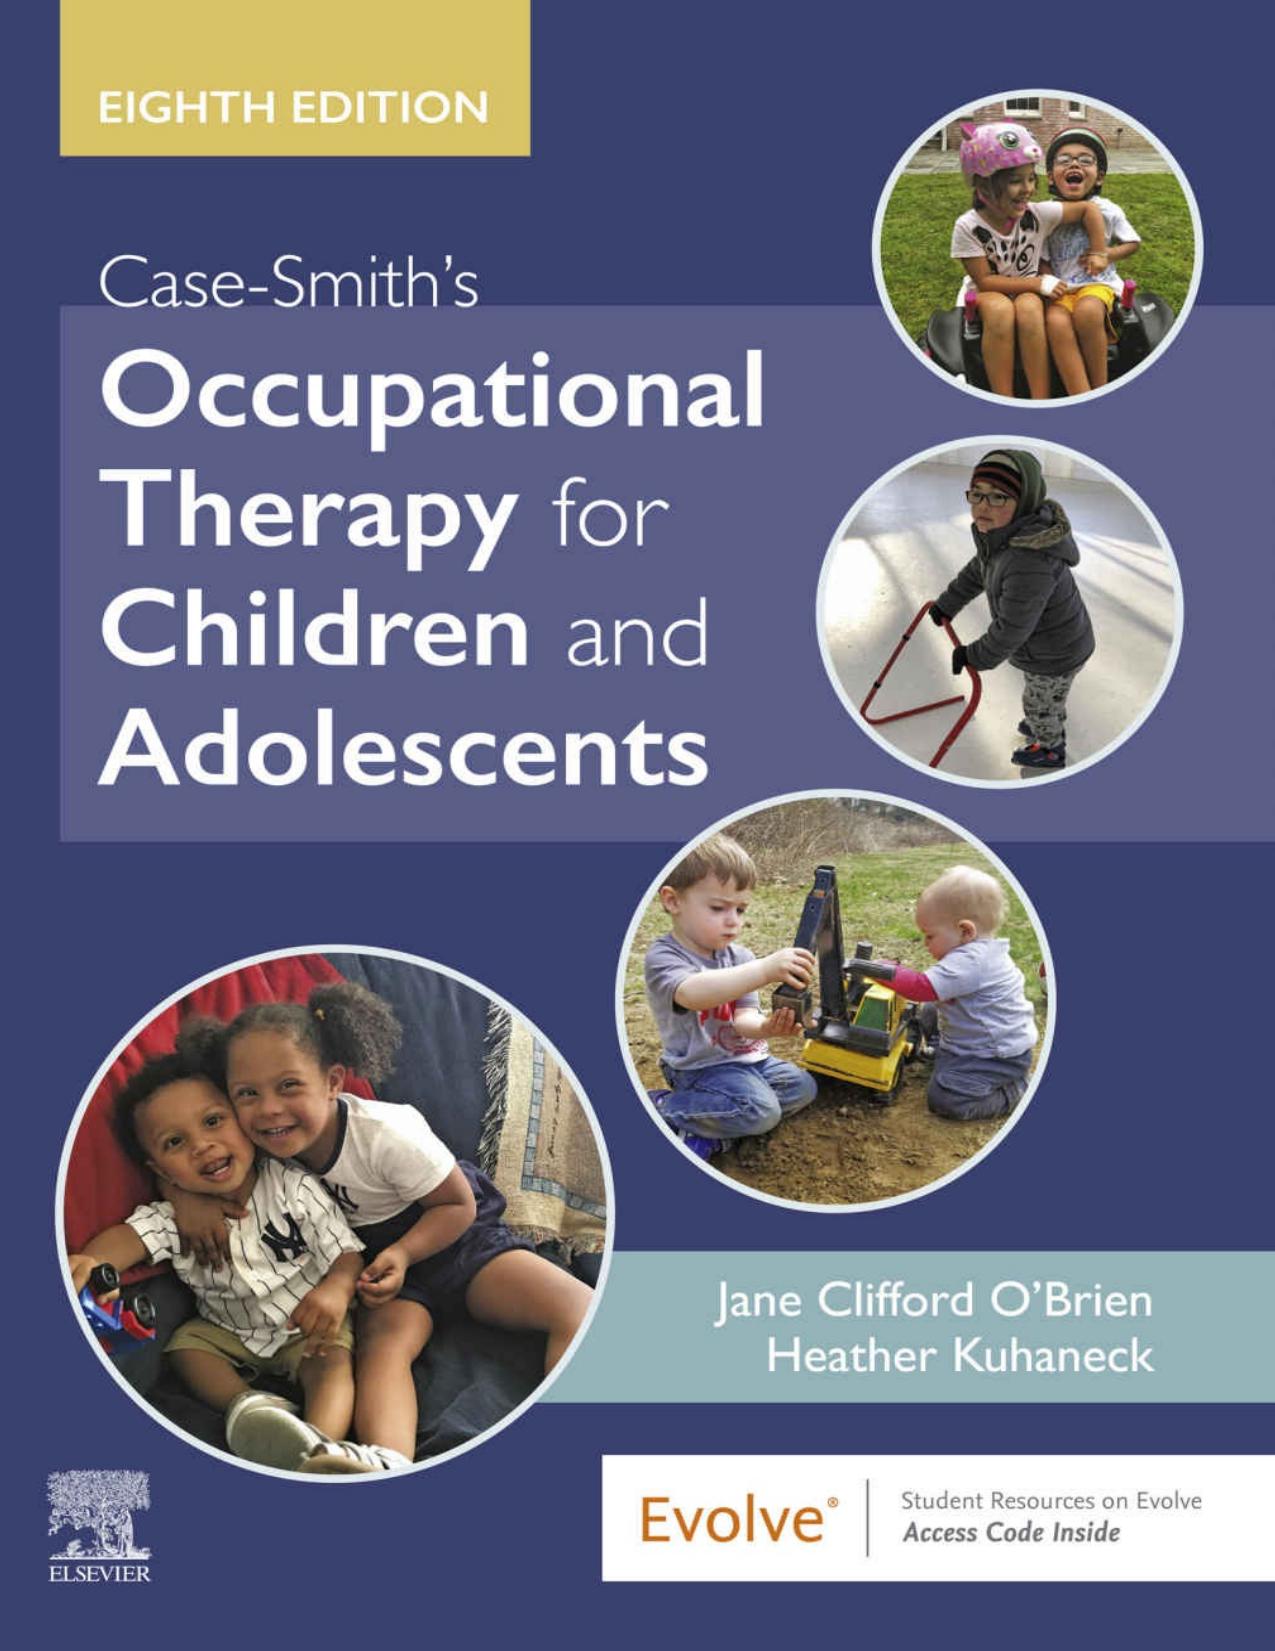 (eBook PDF)Case-Smith s Occupational Therapy for Children and Adolescents 8th by Jane Clifford O'Brien, Heather Kuhaneck